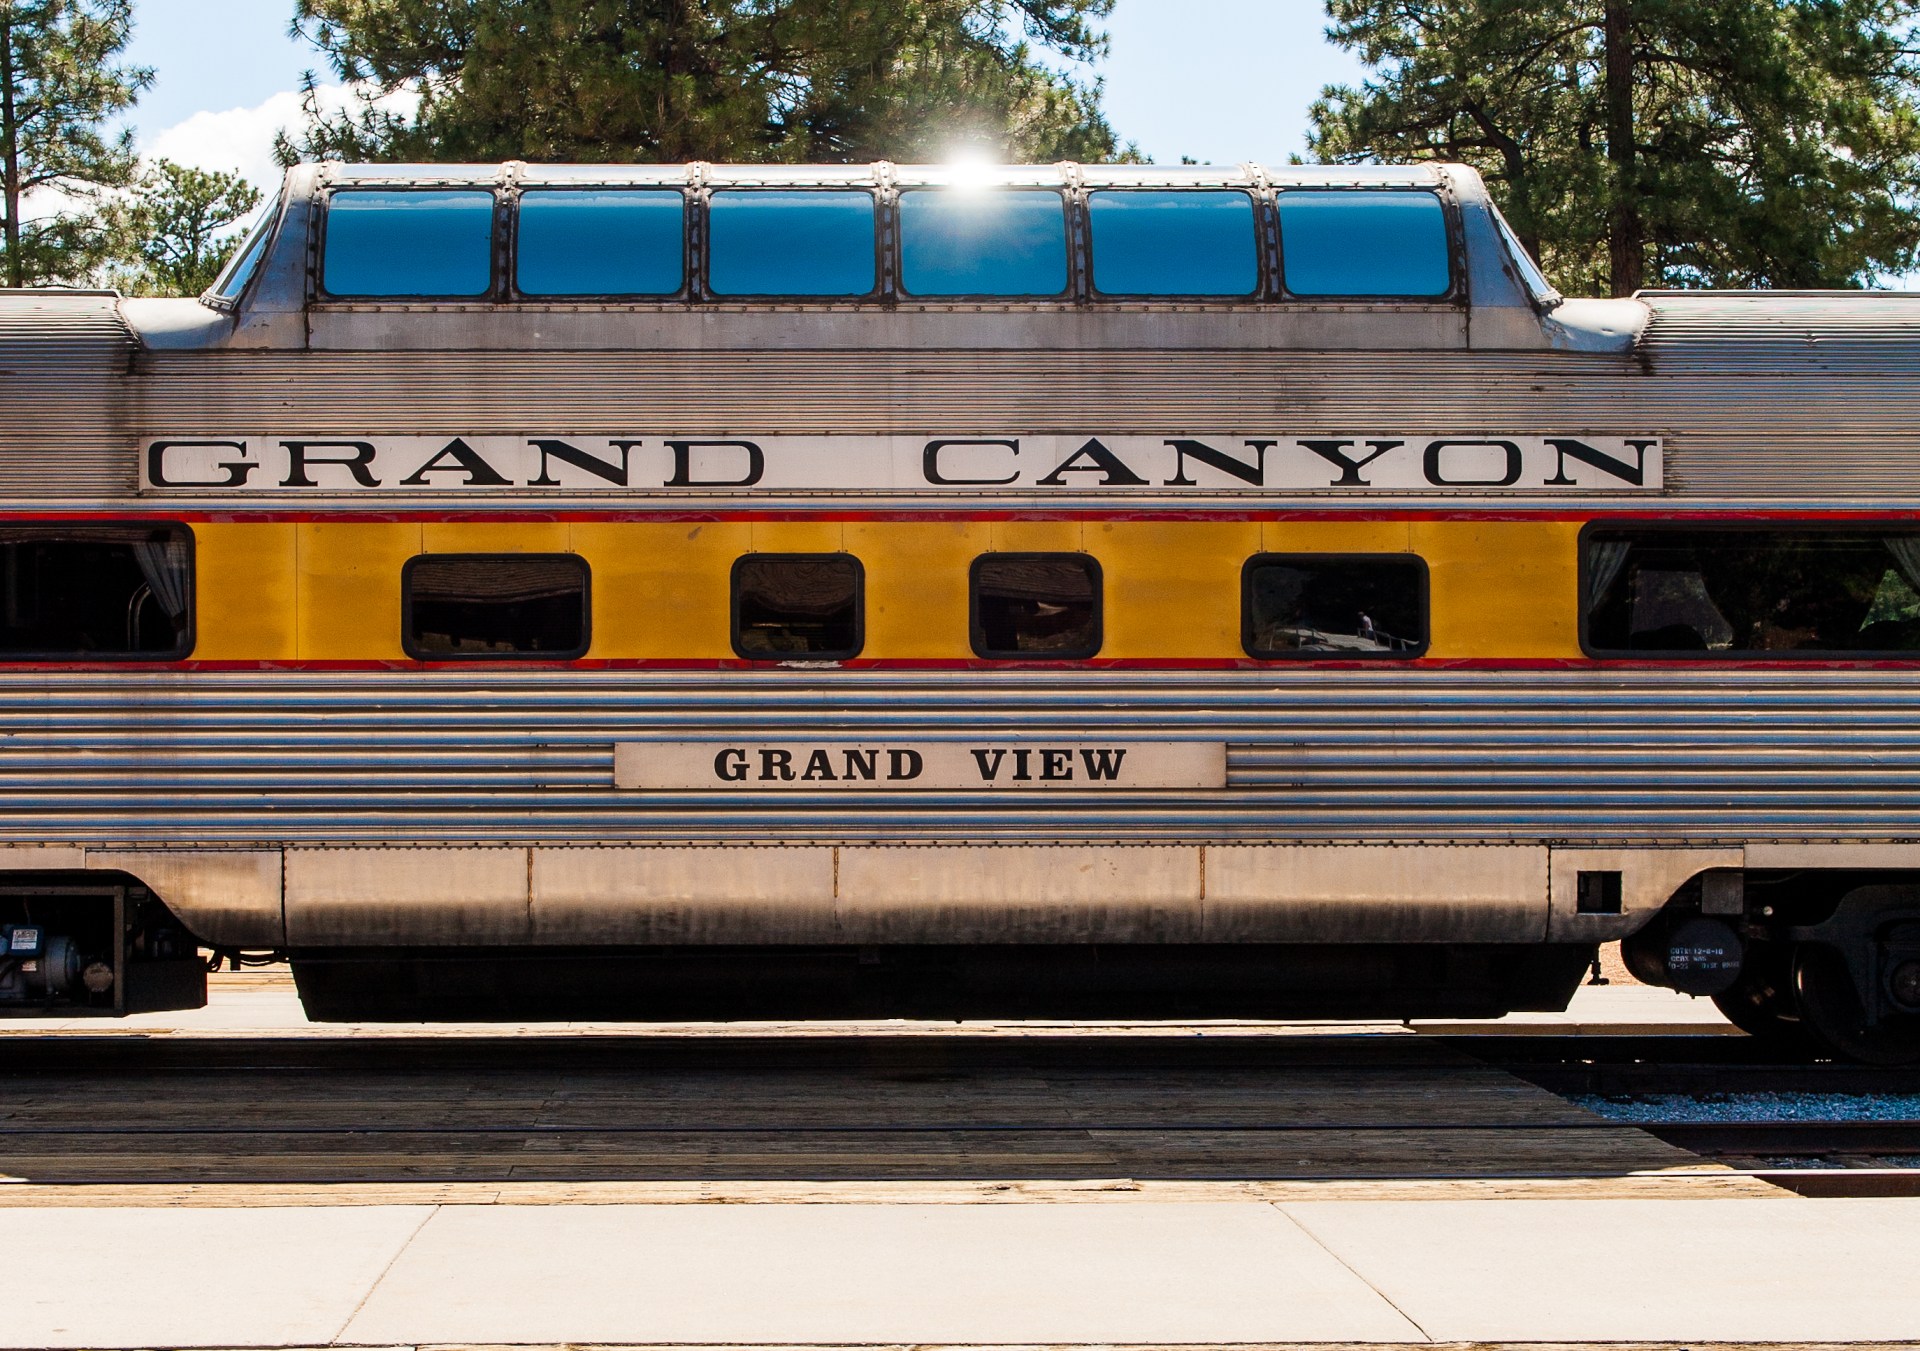 View Of Train In Gran Canyon National Park Railway Station